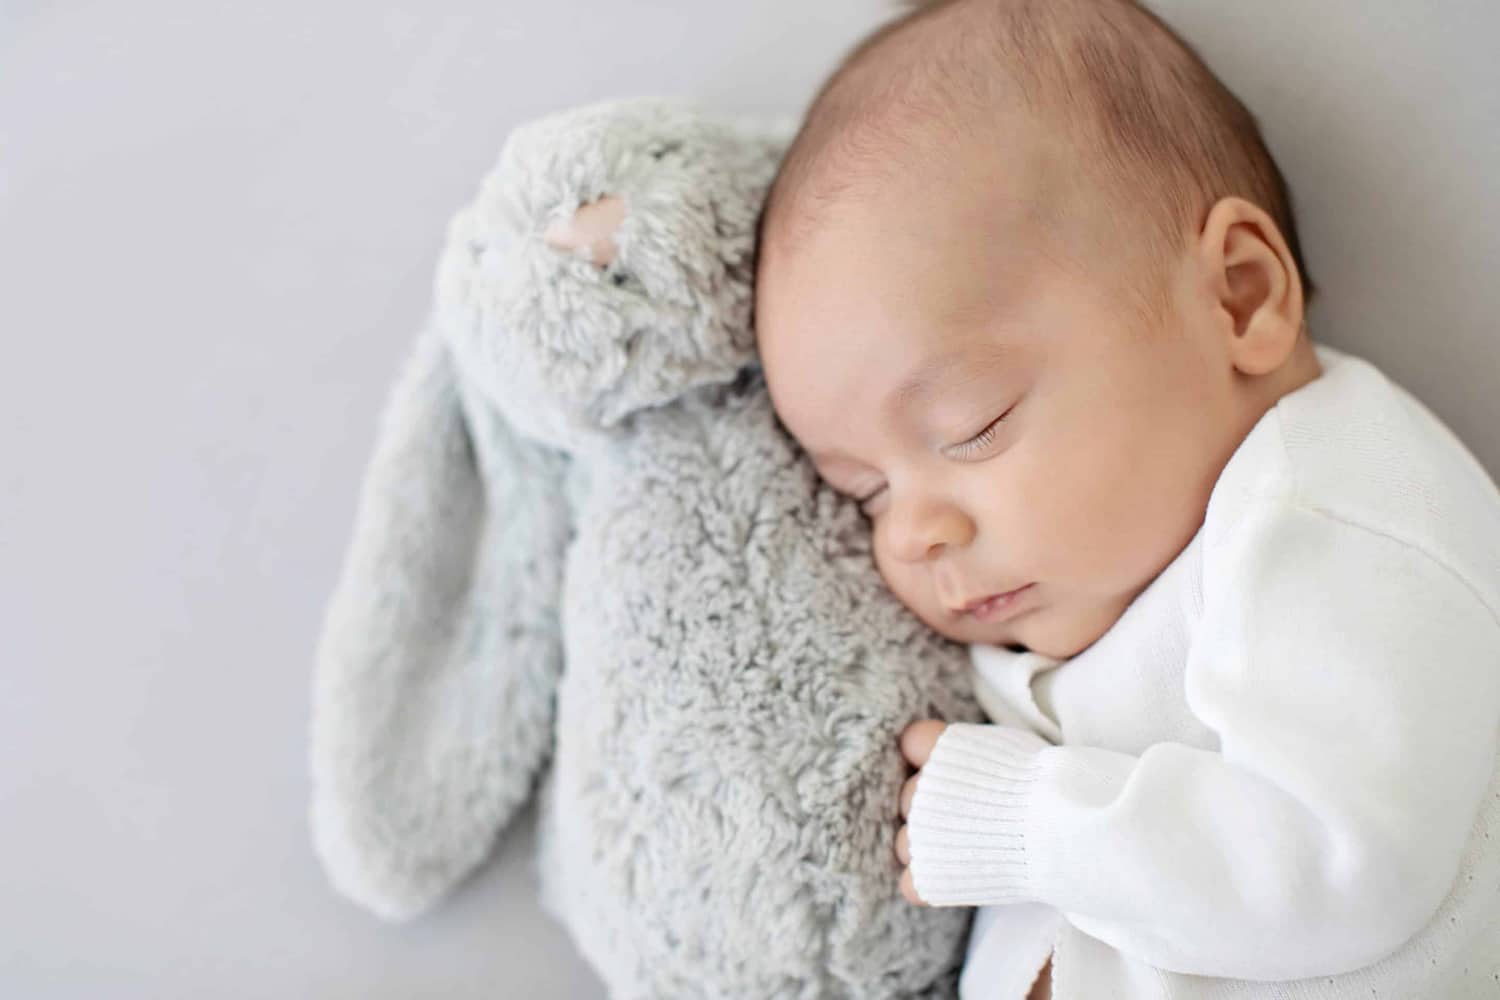 A baby snuggles with a stuffed rabbit.